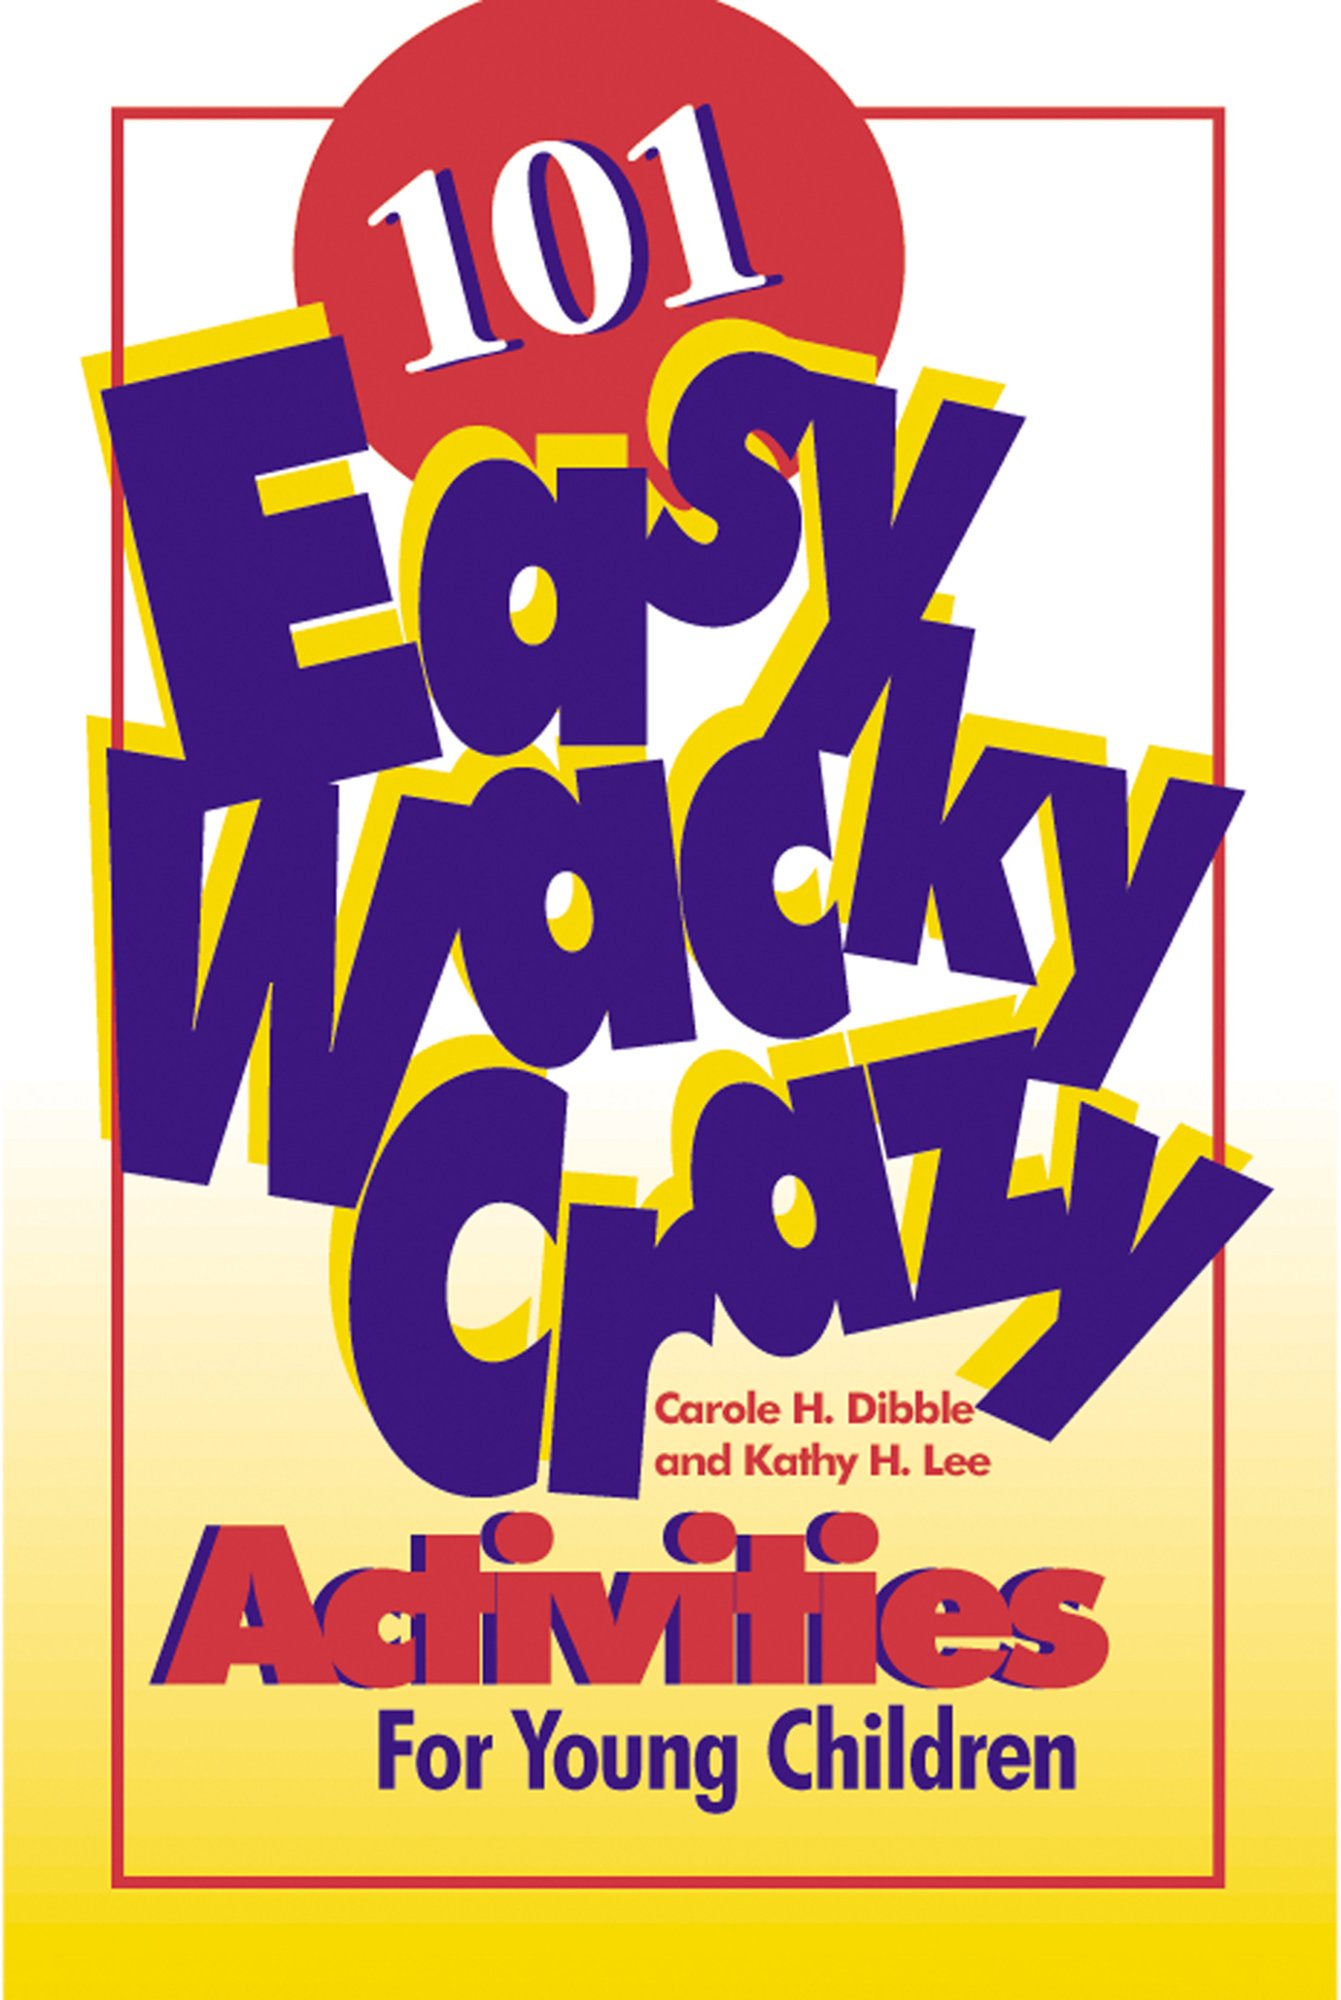 101_easy_wacky_crazy_activities_for_young_children-cover